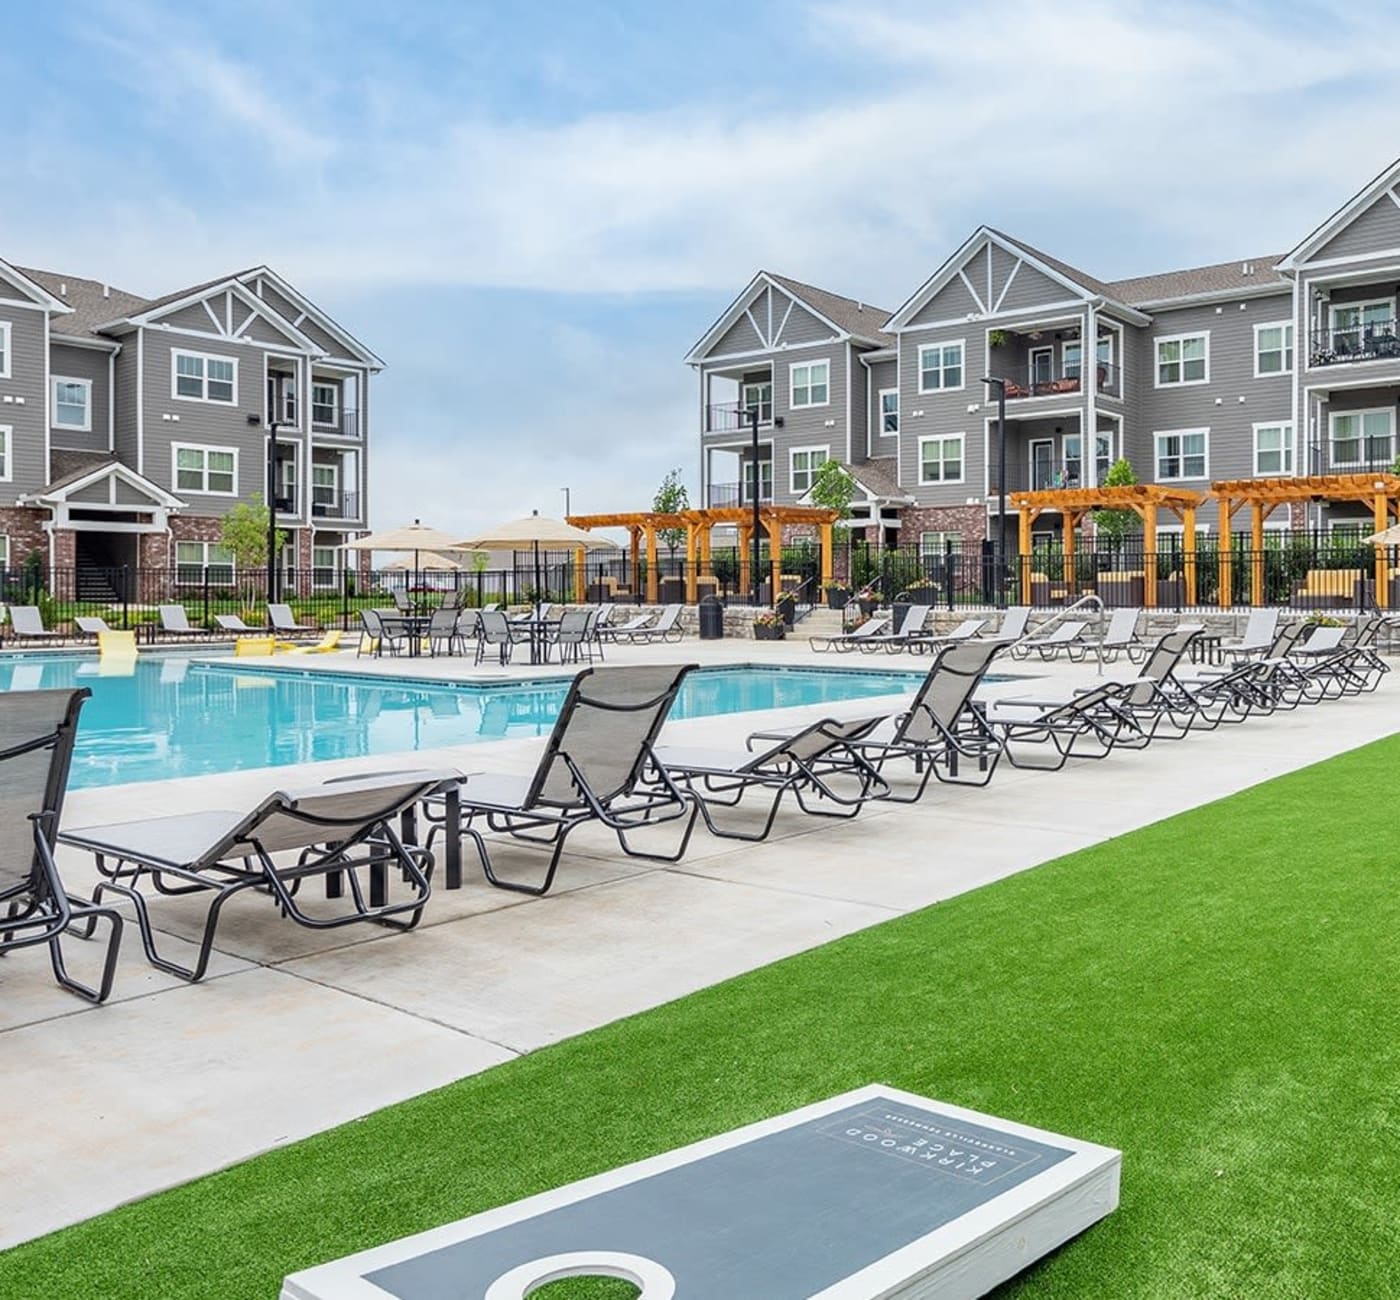 Cornhole game on the turf next to the amazing swimming pool at Kirkwood Place in Clarksville, Tennessee